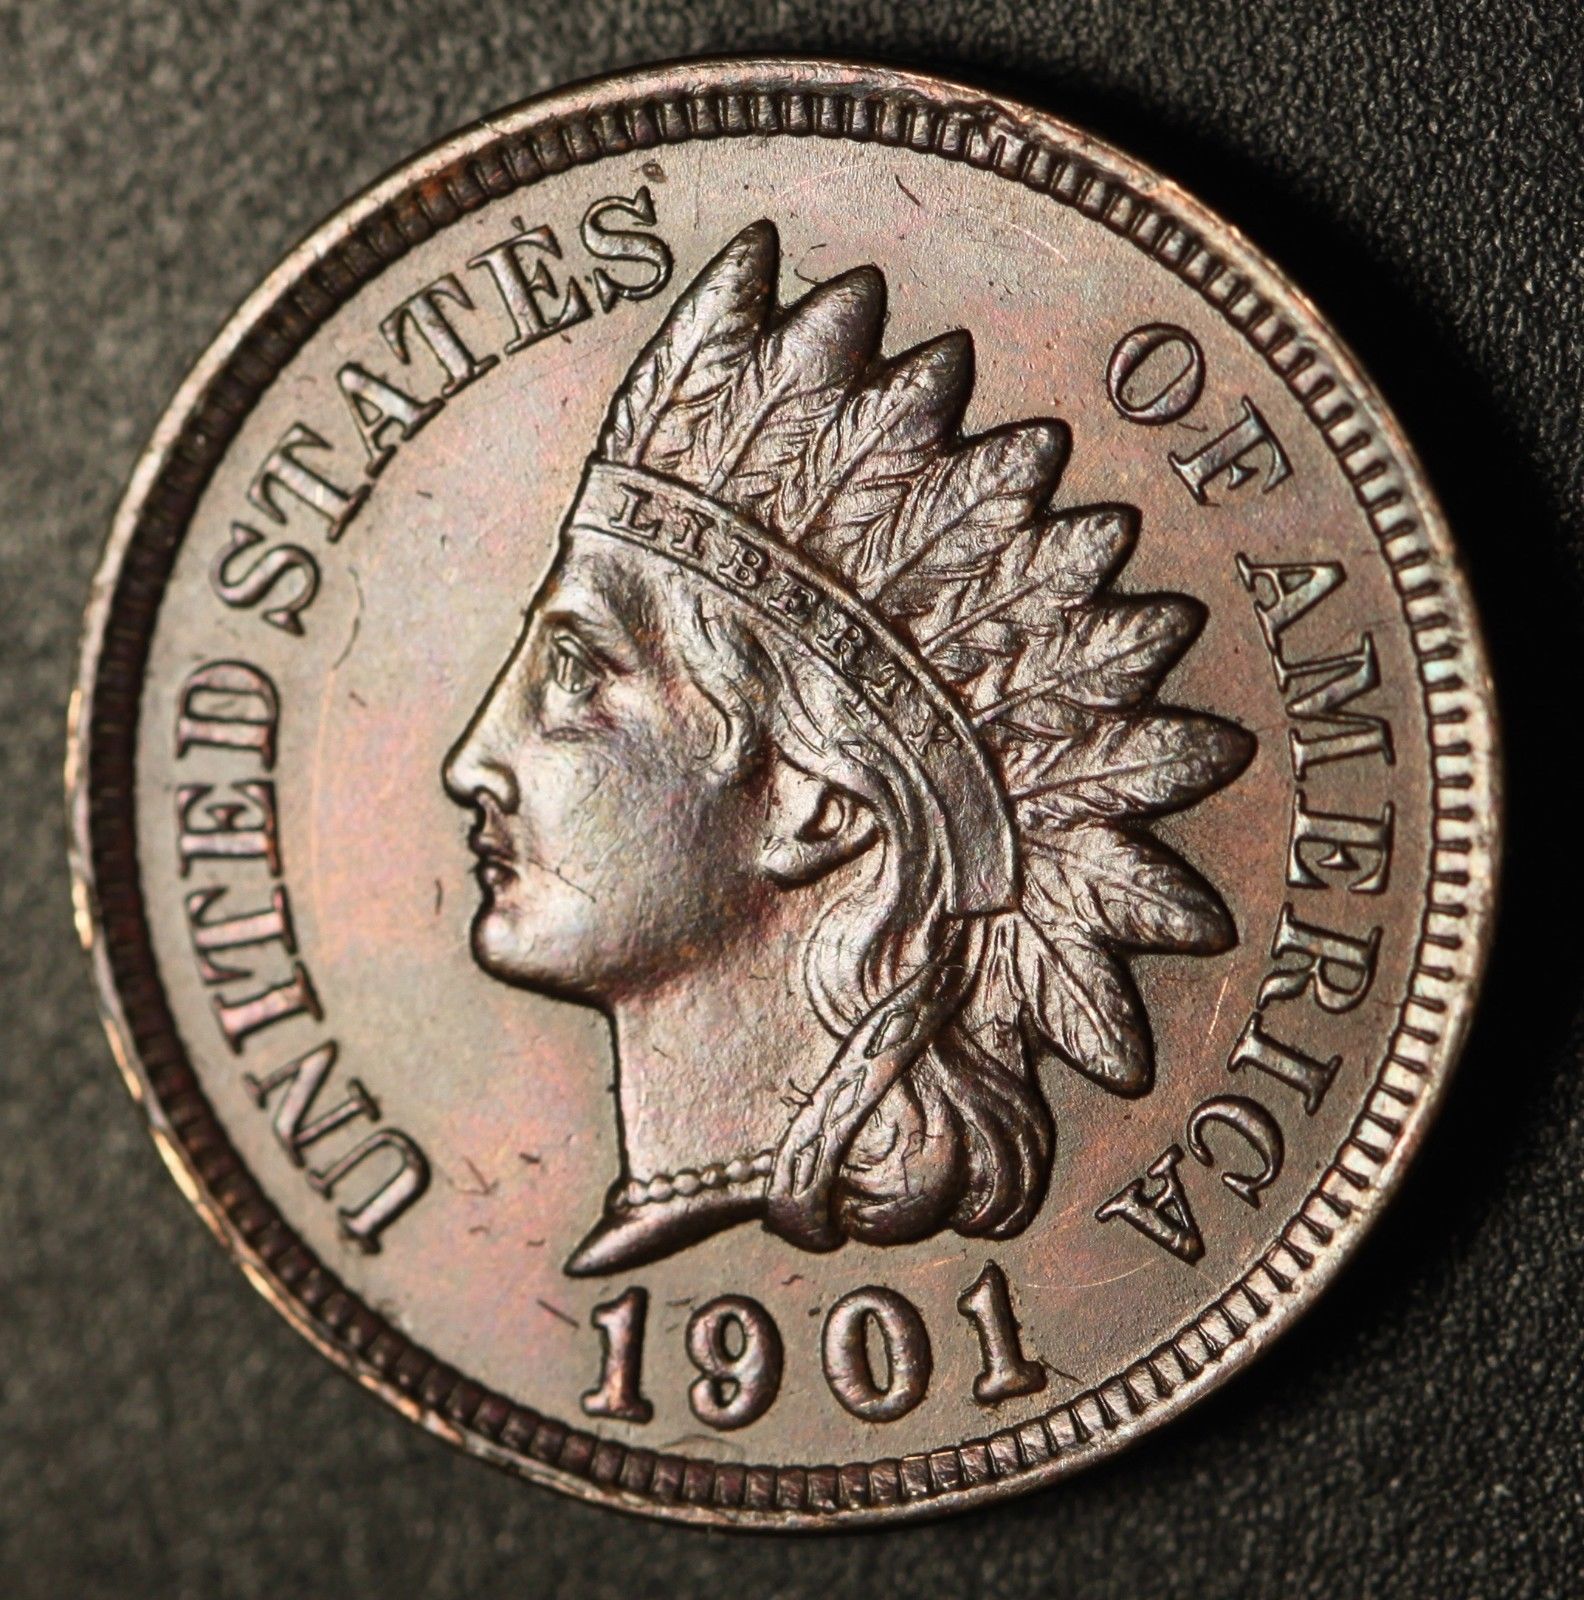 1901 RPD-019 - Indian Head Penny - Photo by Ed Nathanson